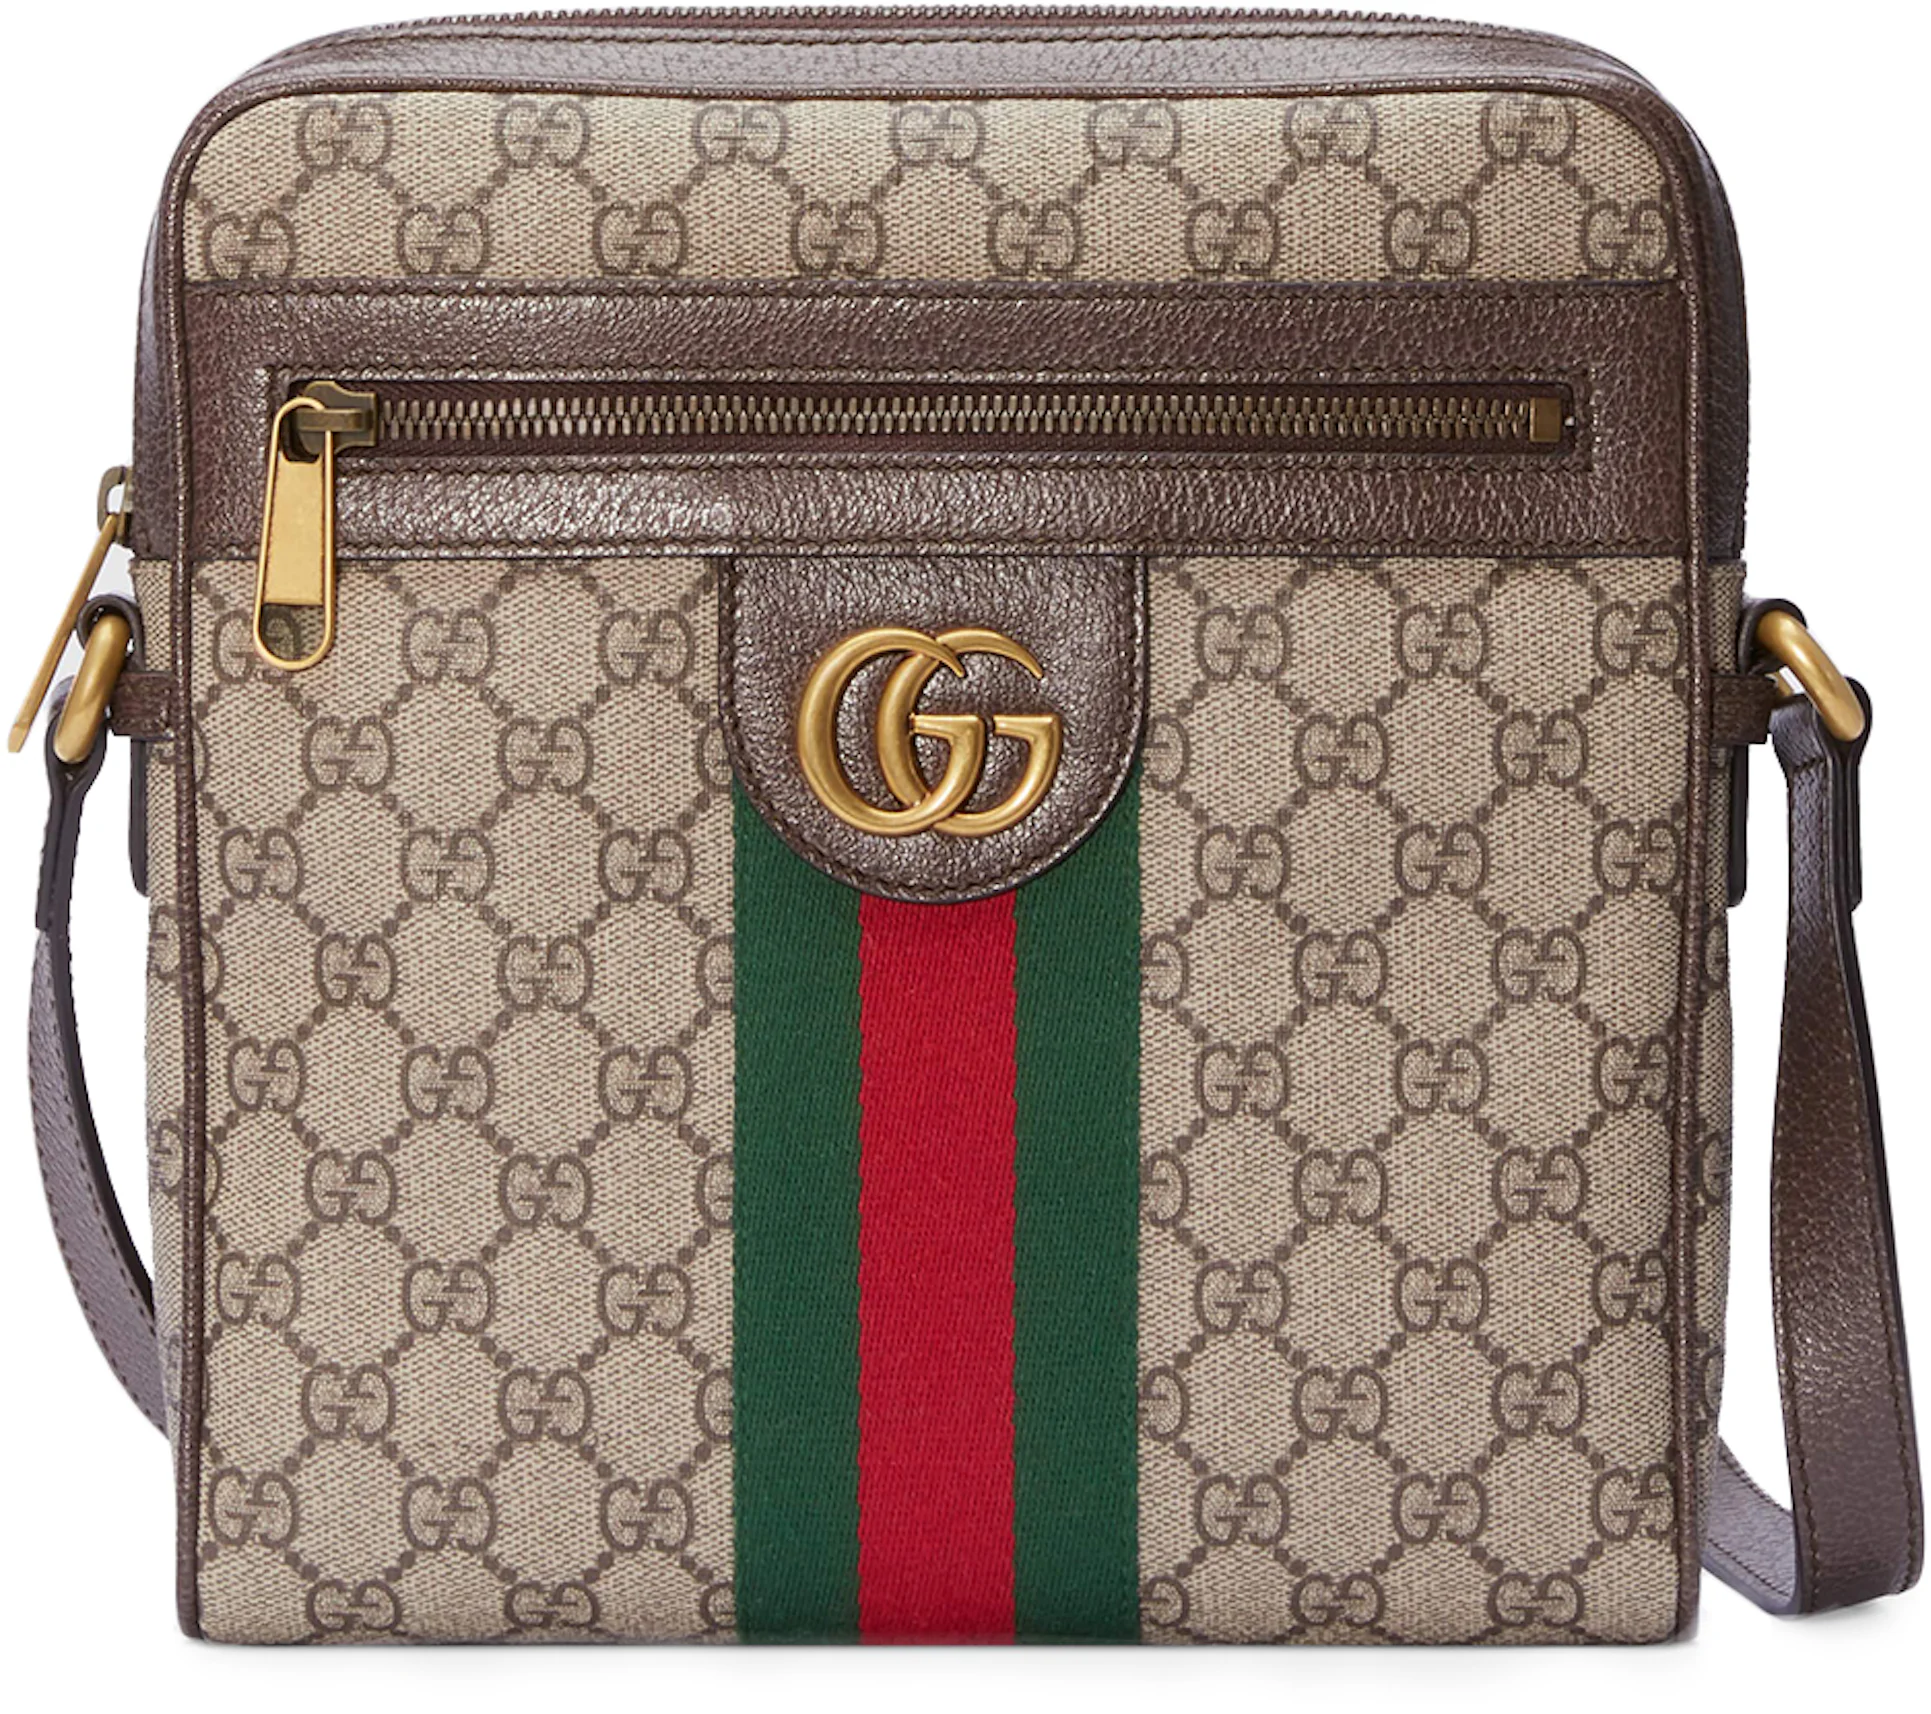 Gucci Ophidia GG Small Messenger Bag Beige/Ebony in Supreme Canvas with ...